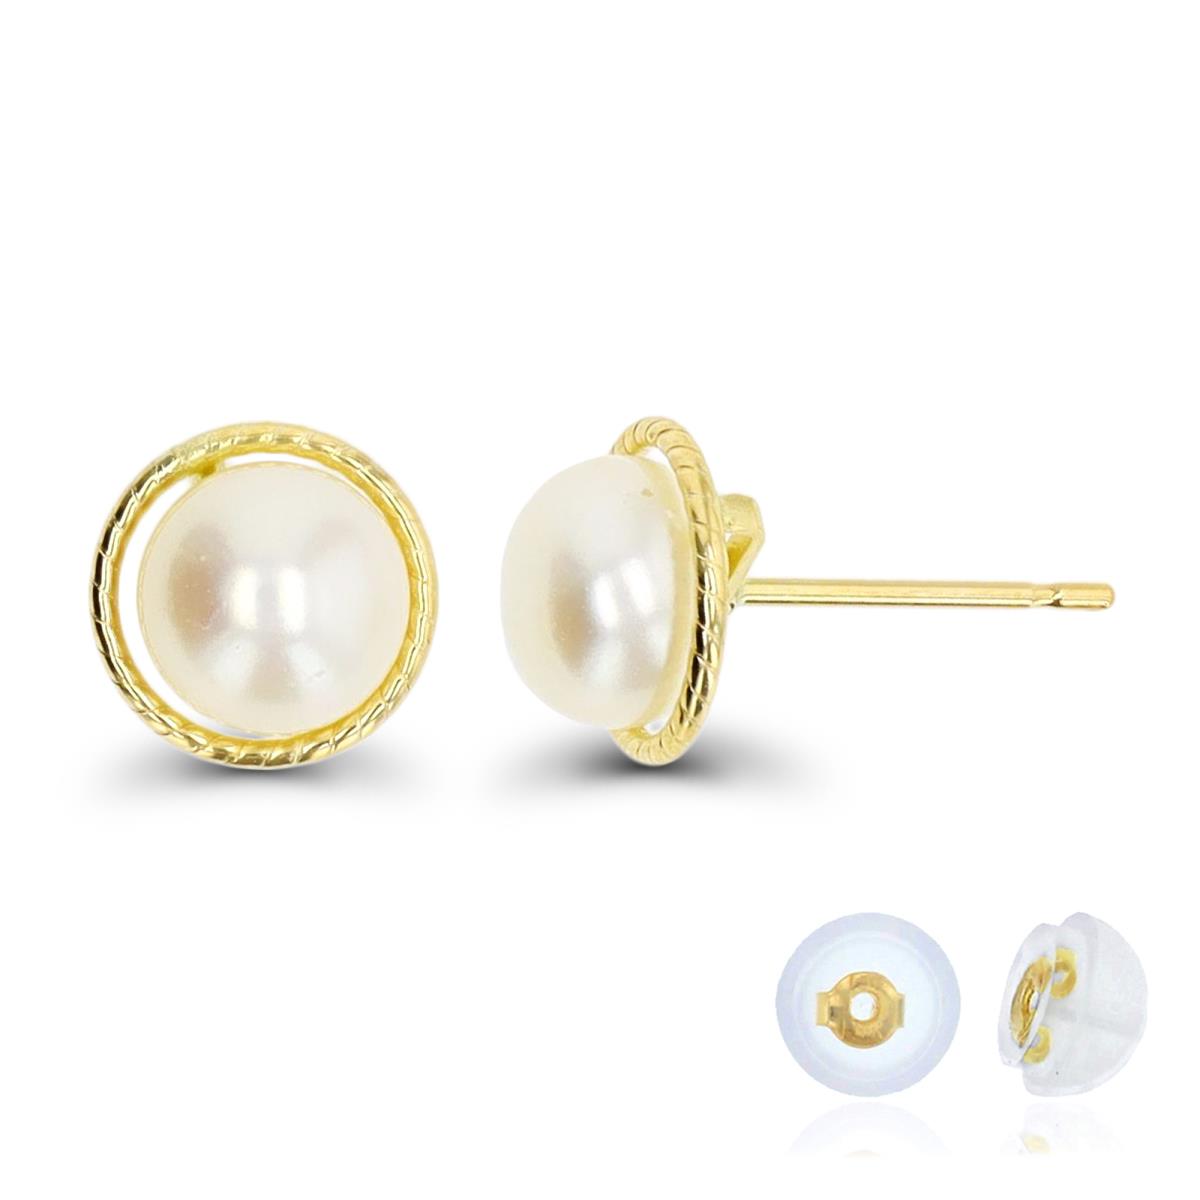 10K Yellow Gold 6mm Rnd Button Pearl Studs with Silicon Backs